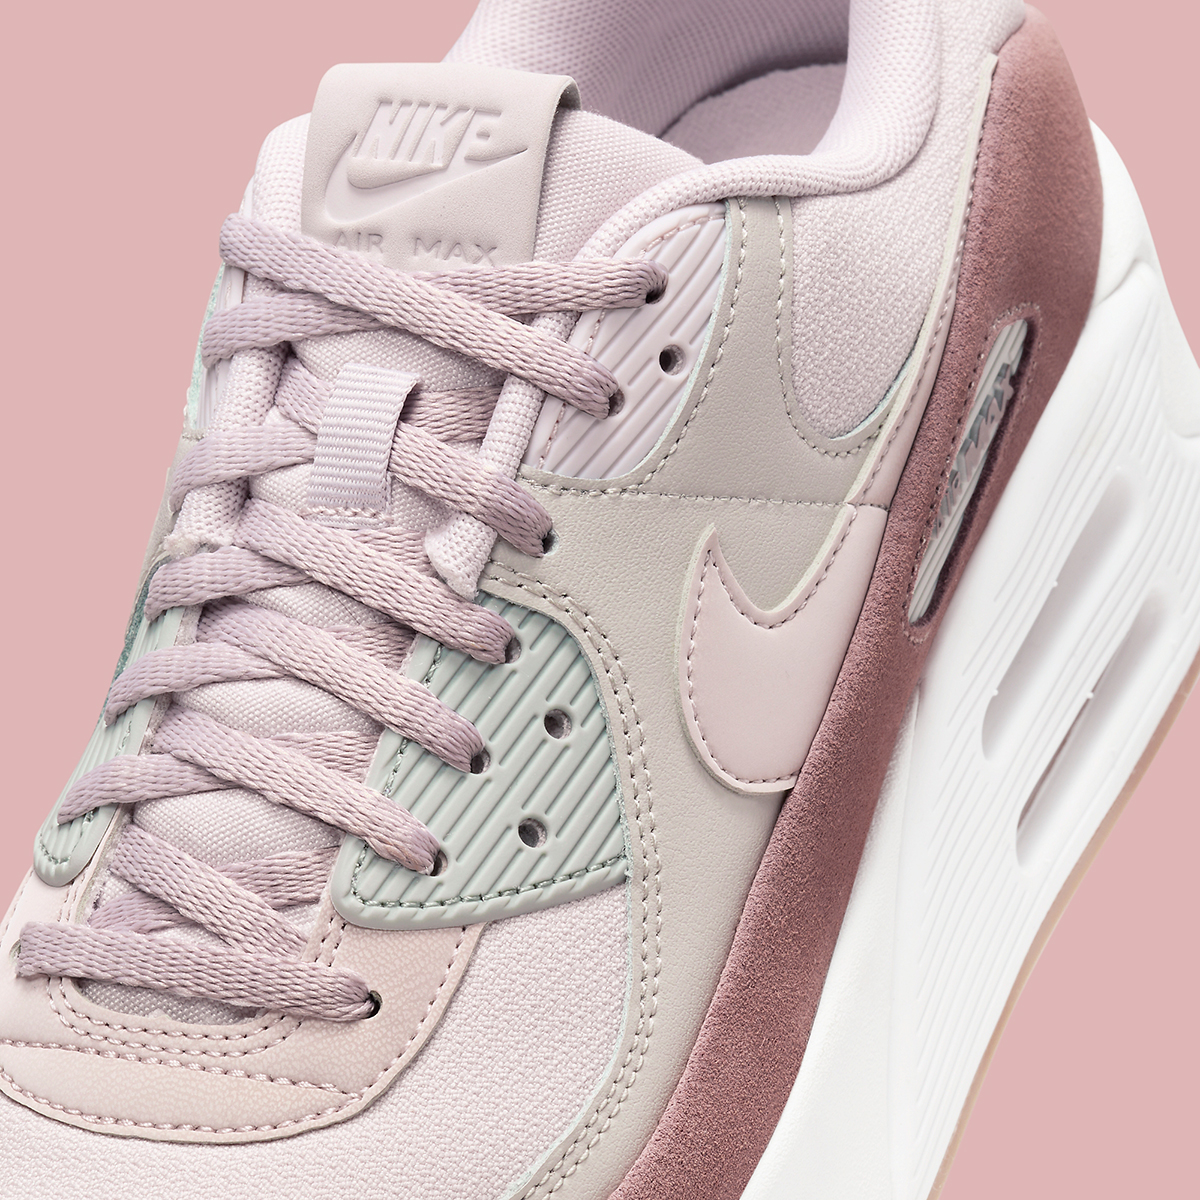 Nike Air Max 90 Double Stacked Pink Fd4328 001 5